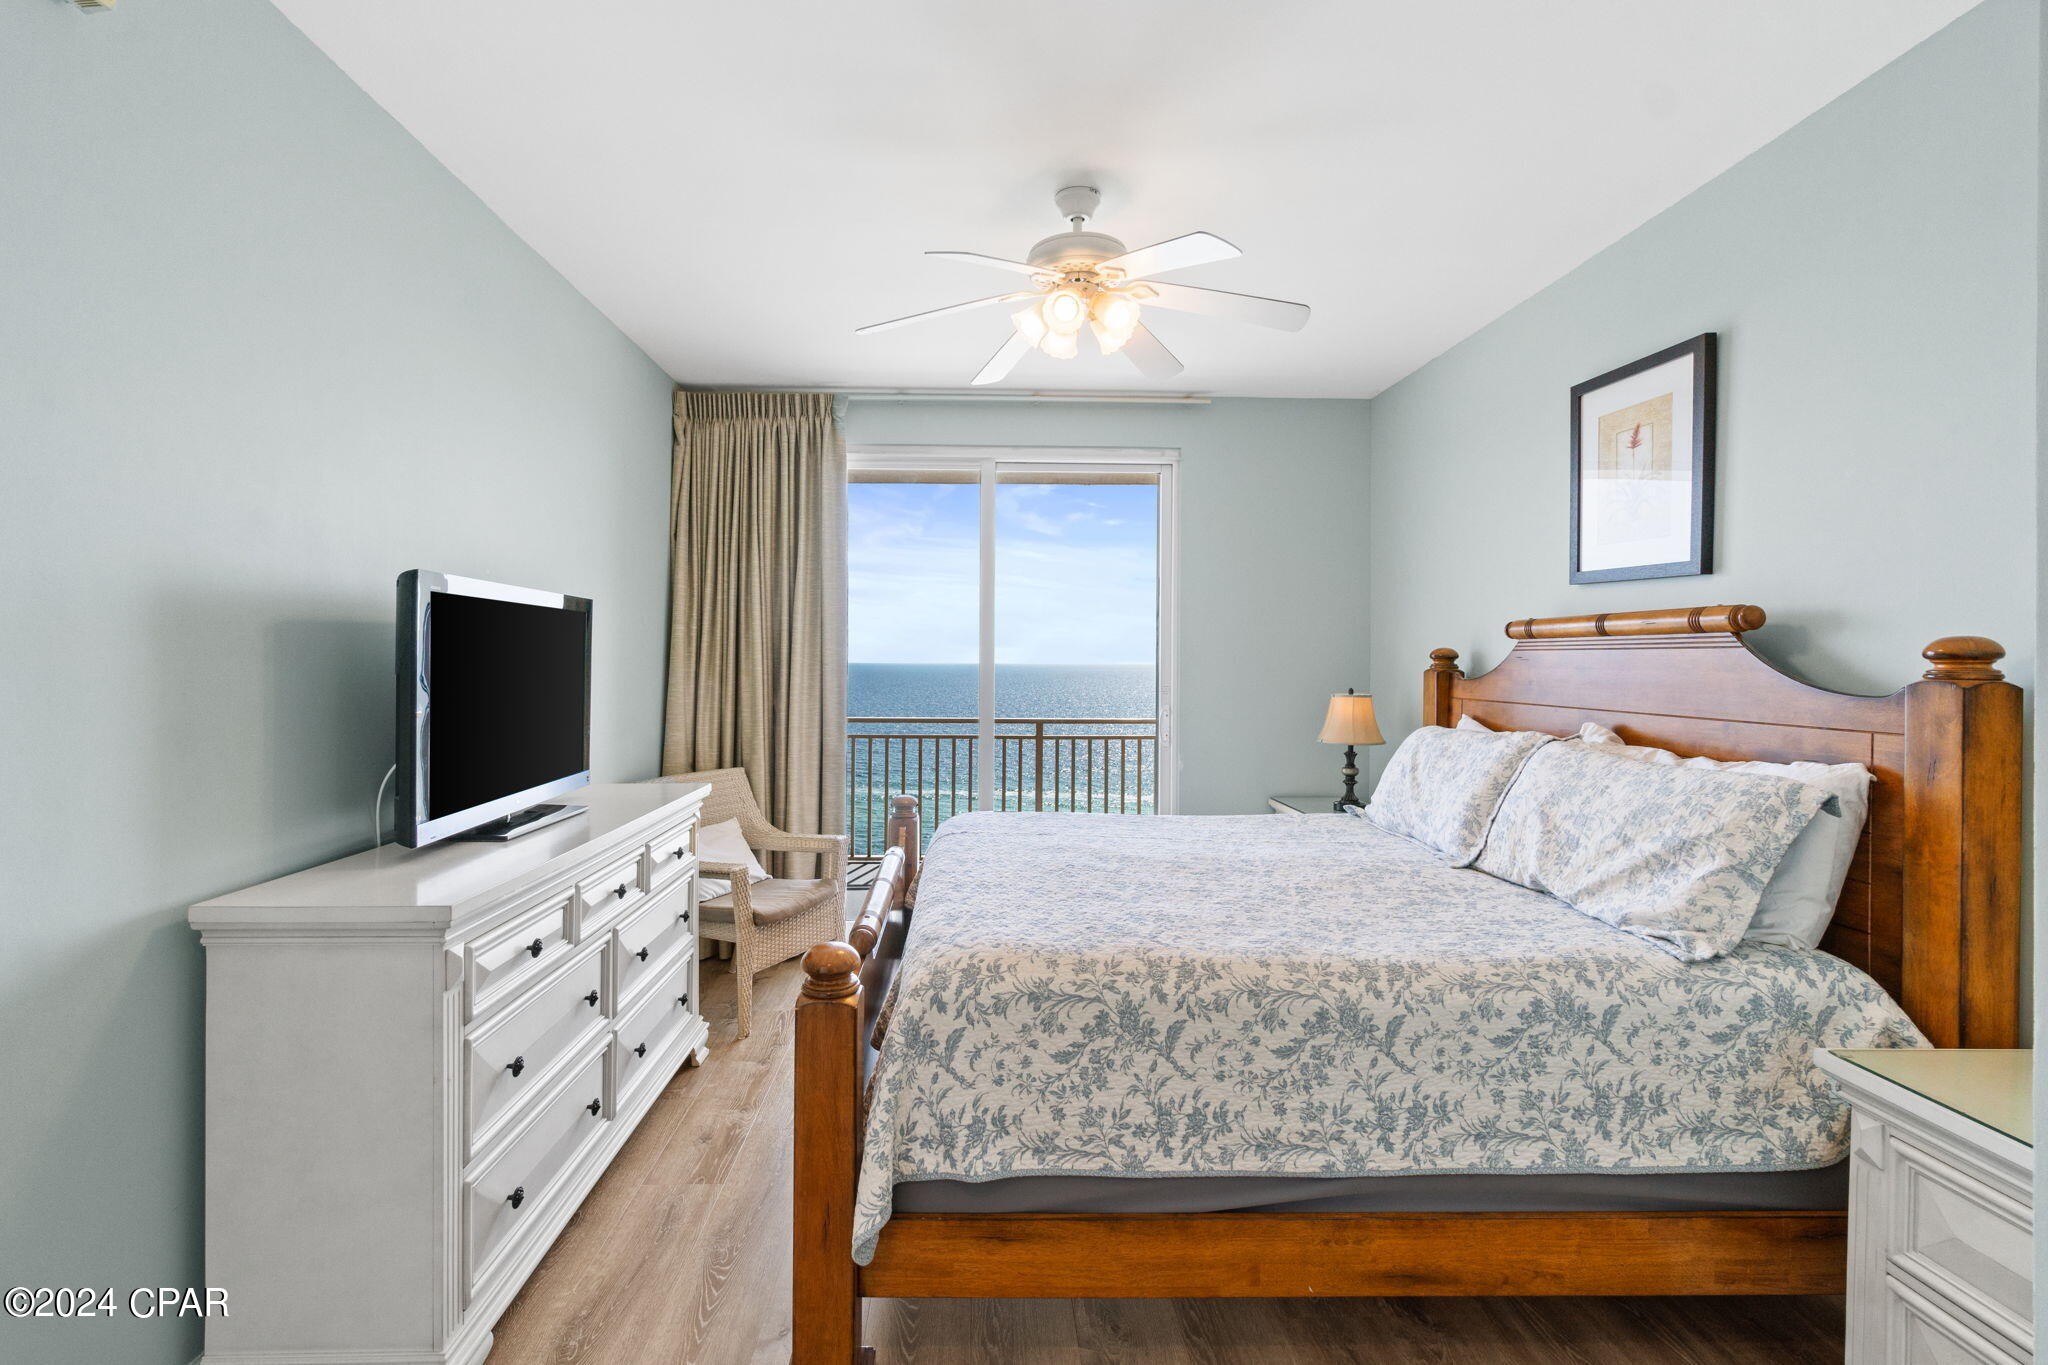 17739 Front Beach Road 1207W, Panama City Beach, Florida, 32413, United States, 2 Bedrooms Bedrooms, ,2 BathroomsBathrooms,Residential,For Sale,17739 Front Beach Road 1207W,1485794